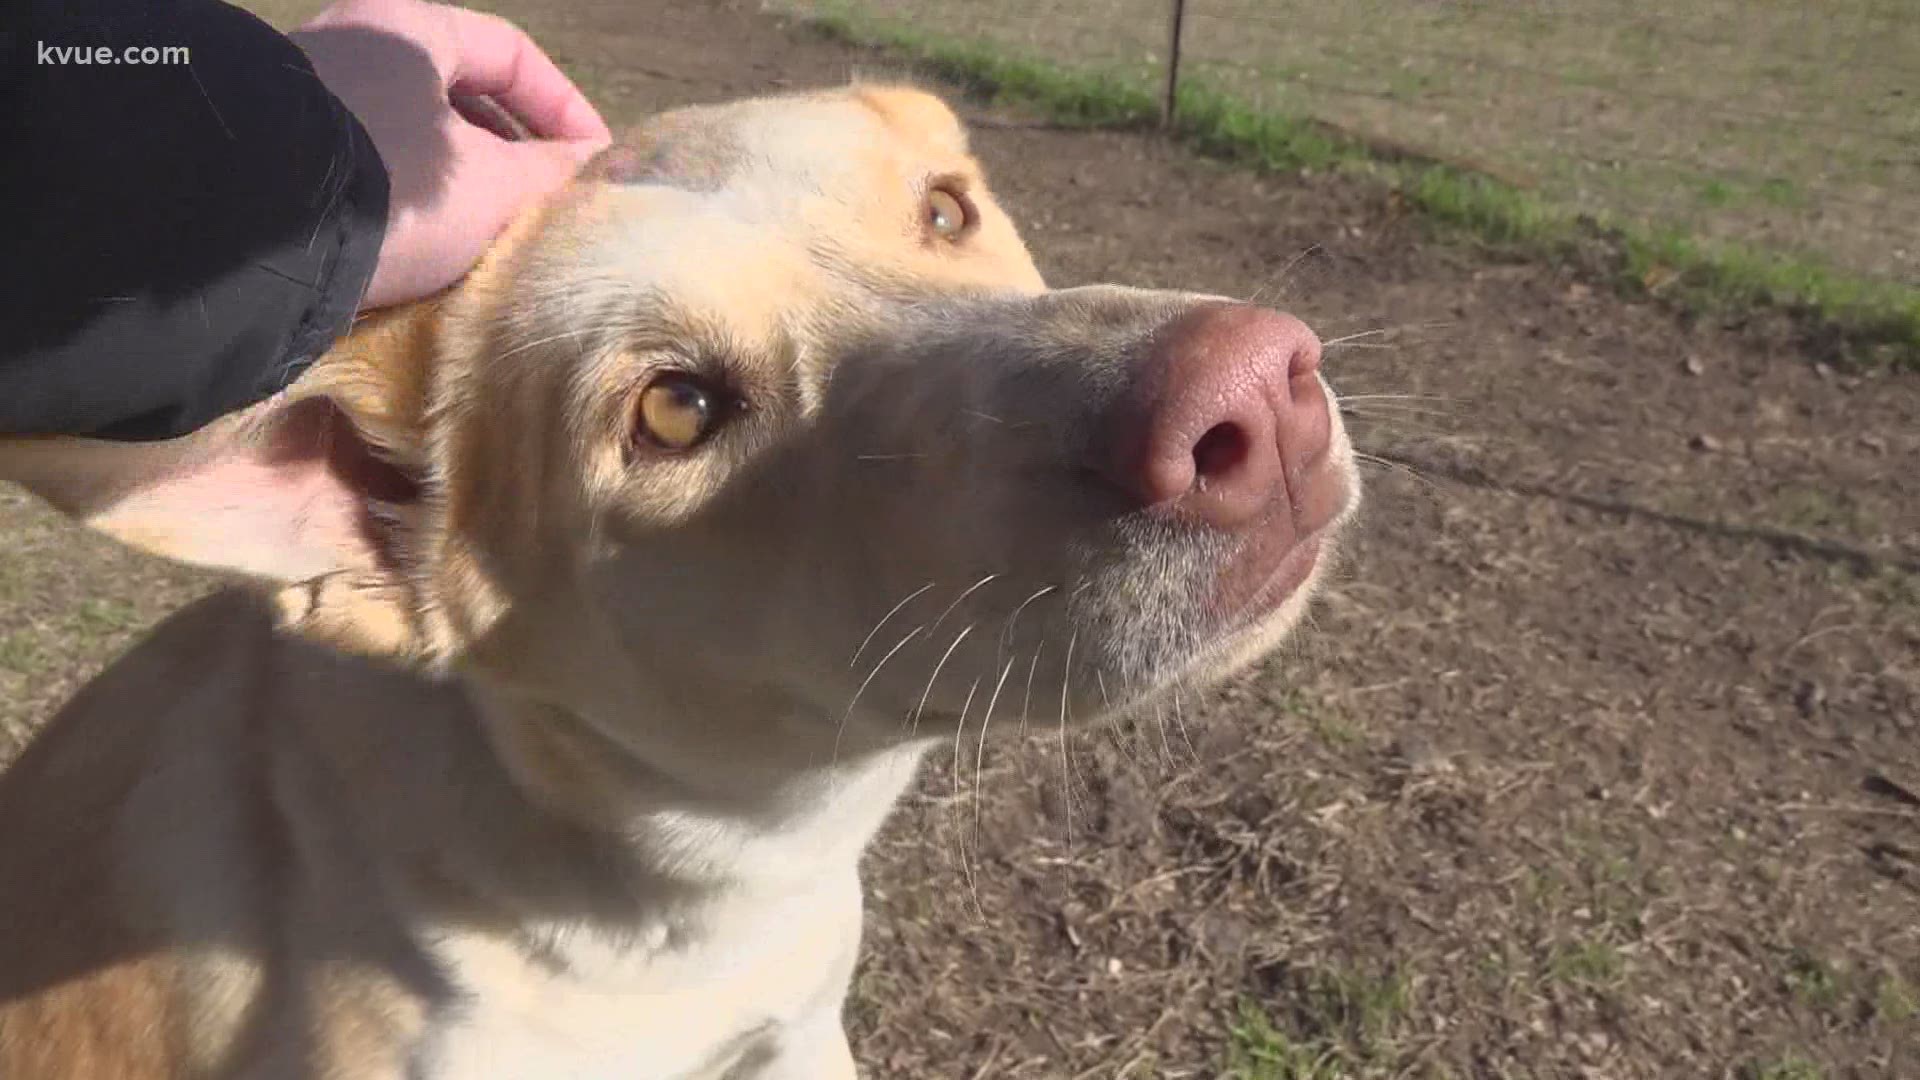 Lucy is a sweet one-year-old pup who just wants pets and love.